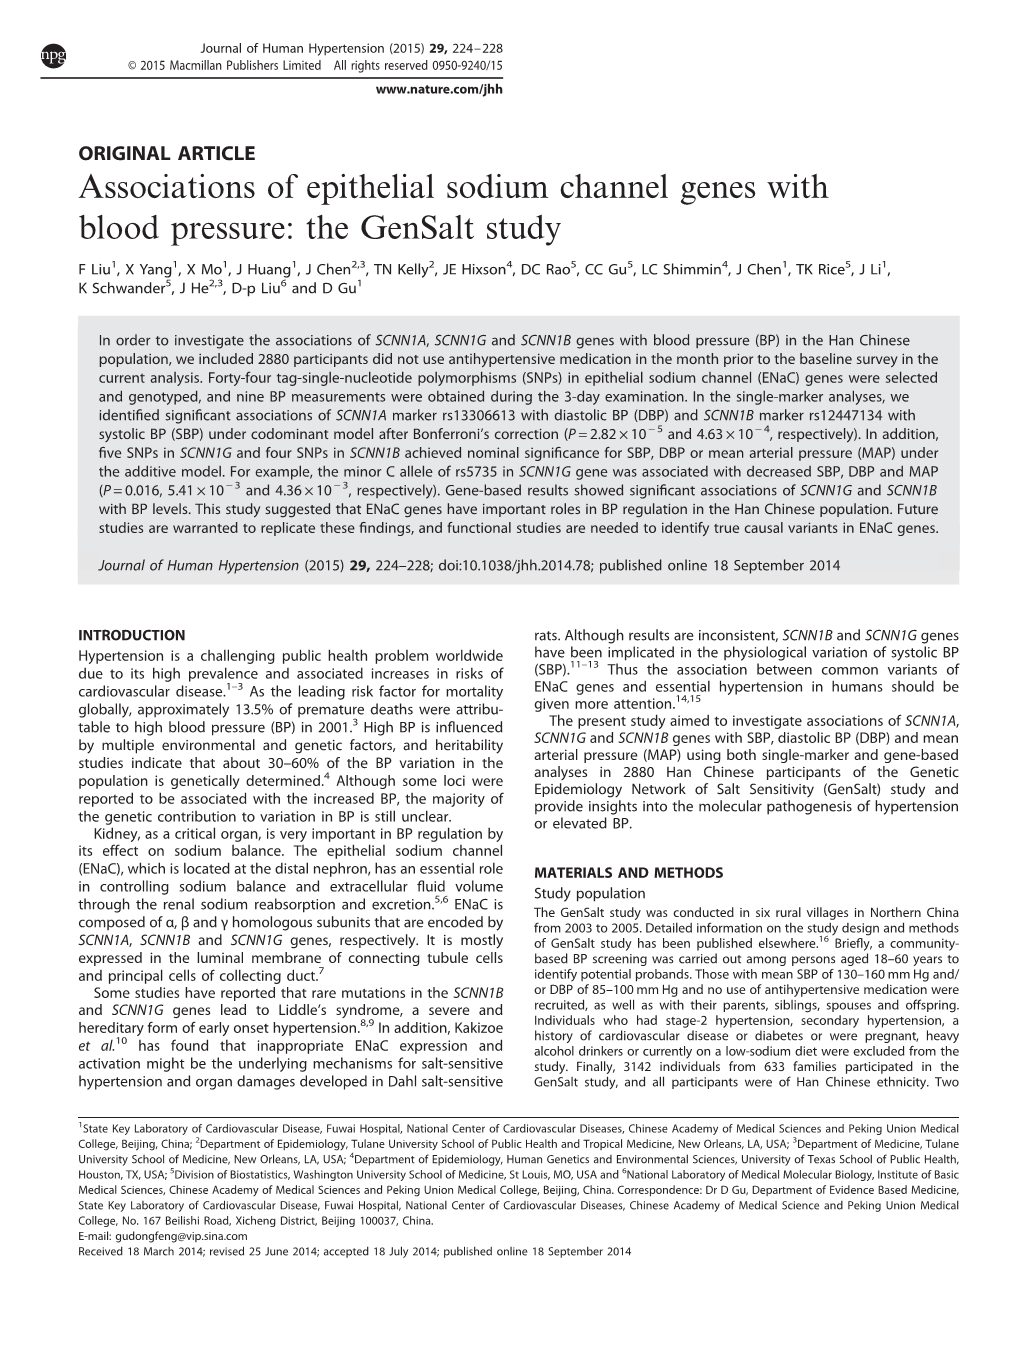 Associations of Epithelial Sodium Channel Genes with Blood Pressure: the Gensalt Study